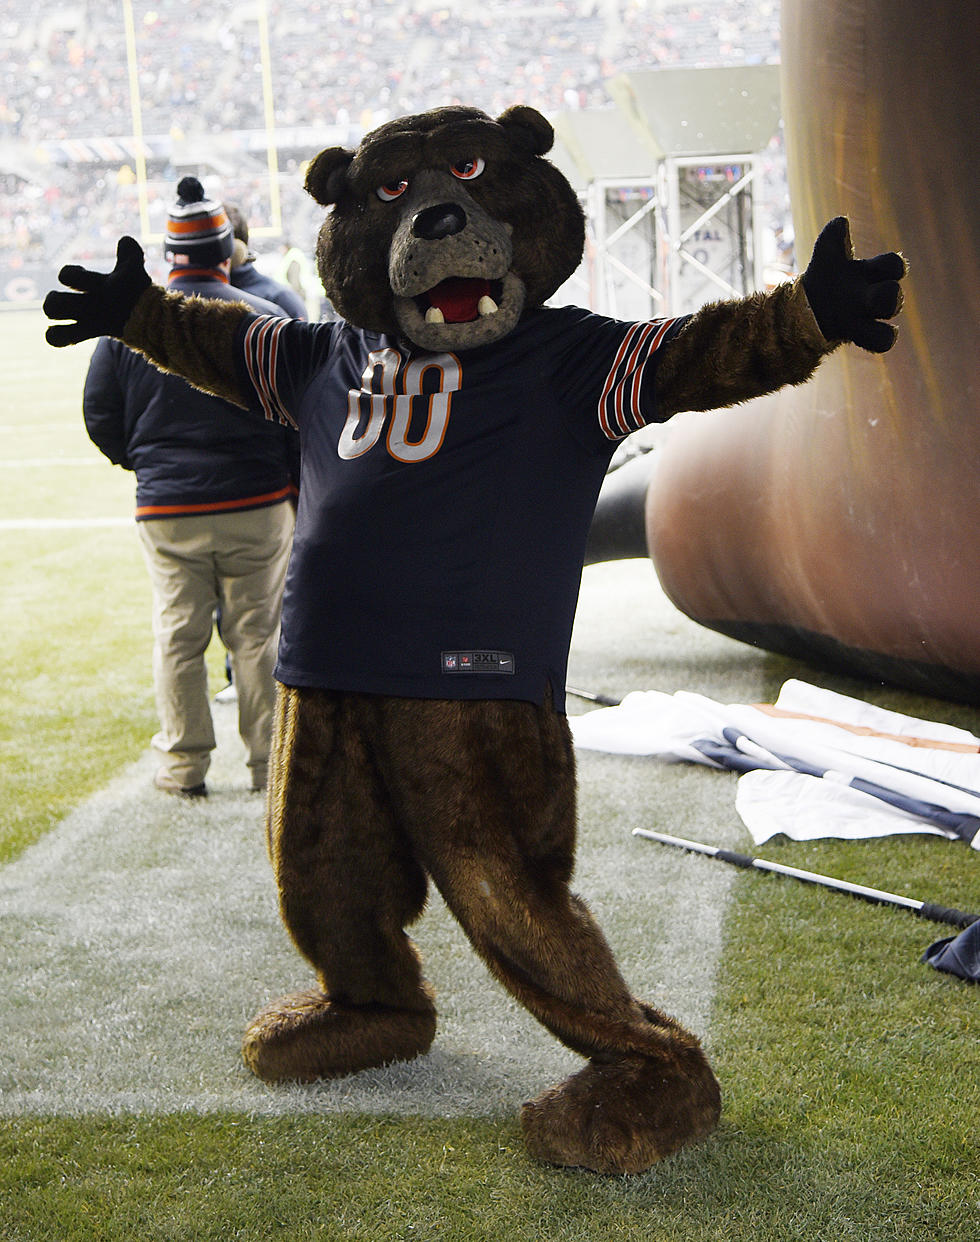 Chicago Bears Mascot Scares the Pants off Some Unsuspecting Kids [VIDEO]